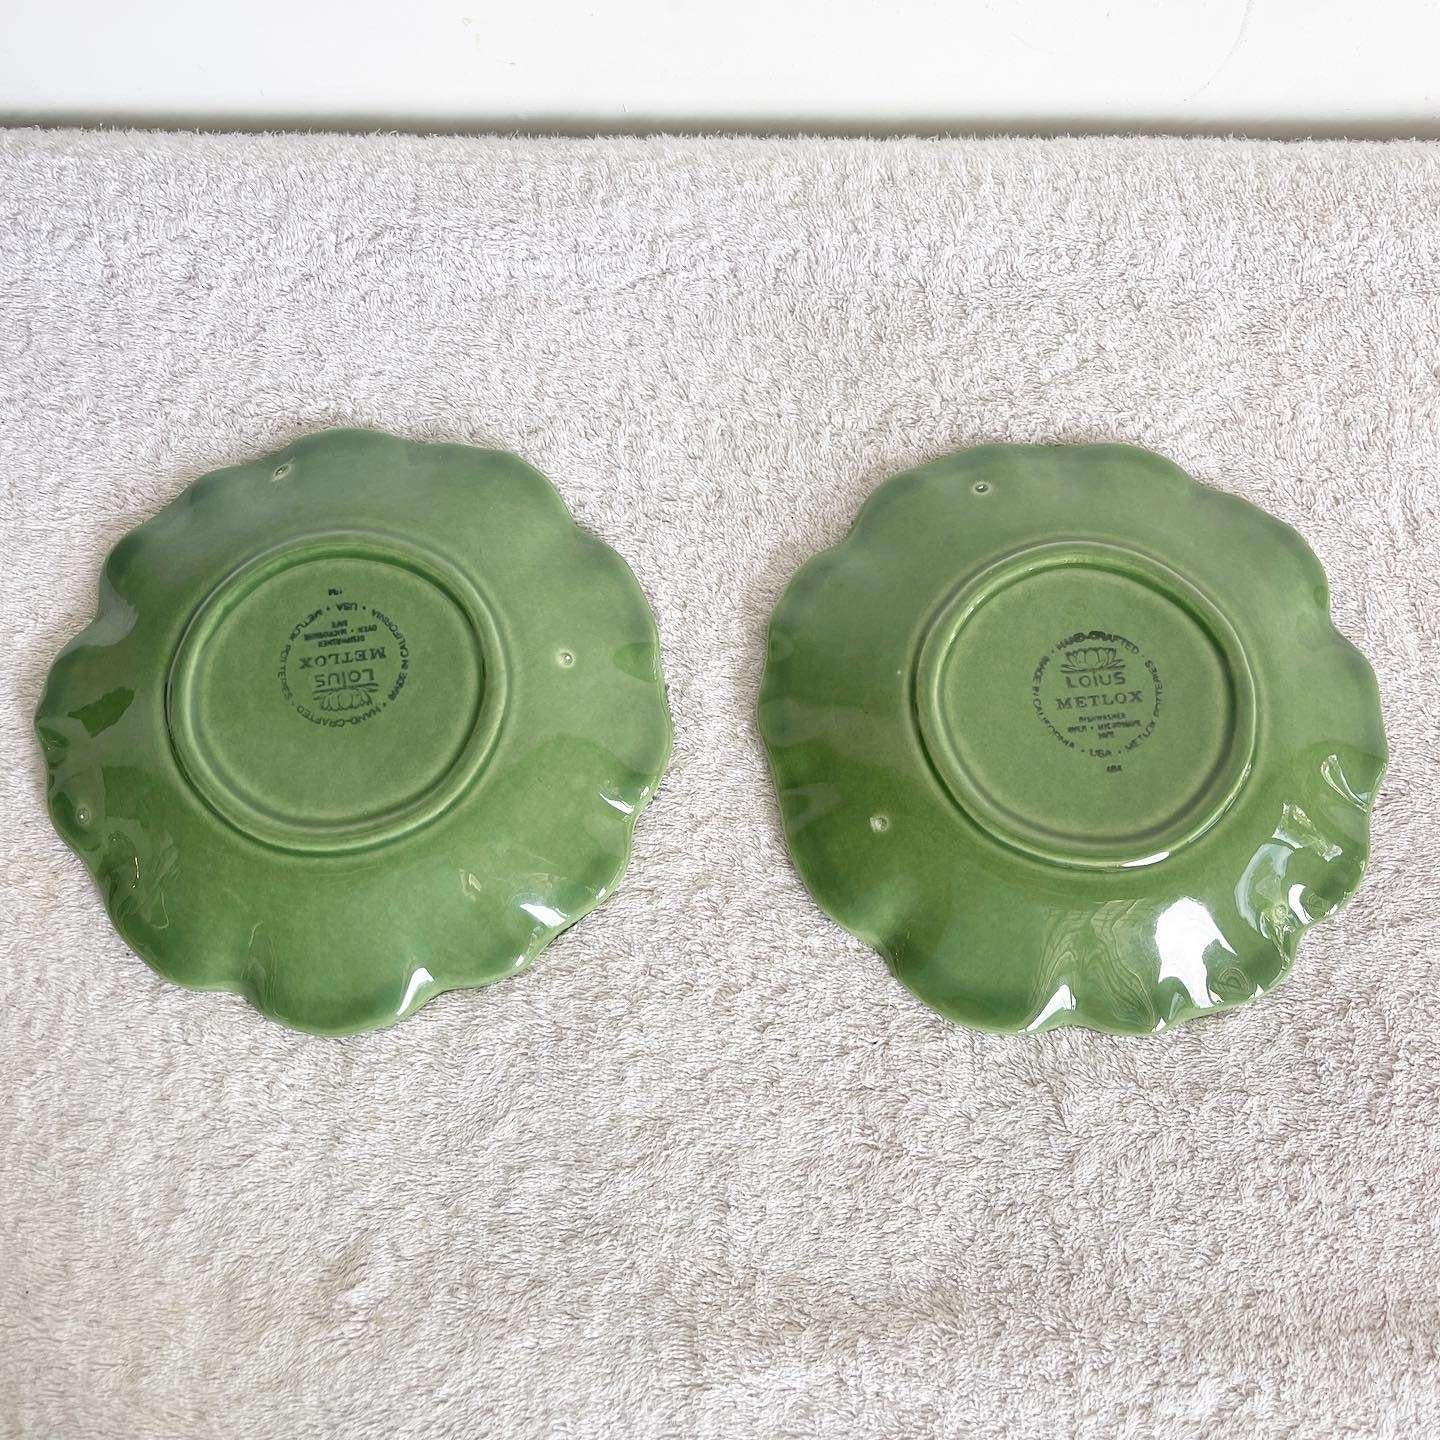 Enhance your dining experience with this exceptional pair of vintage green Metlox Poppytrail Lotus plates. The vibrant green hue adds a pop of color to your table, while the timeless design exudes vintage charm.

Exceptional pair of vintage green